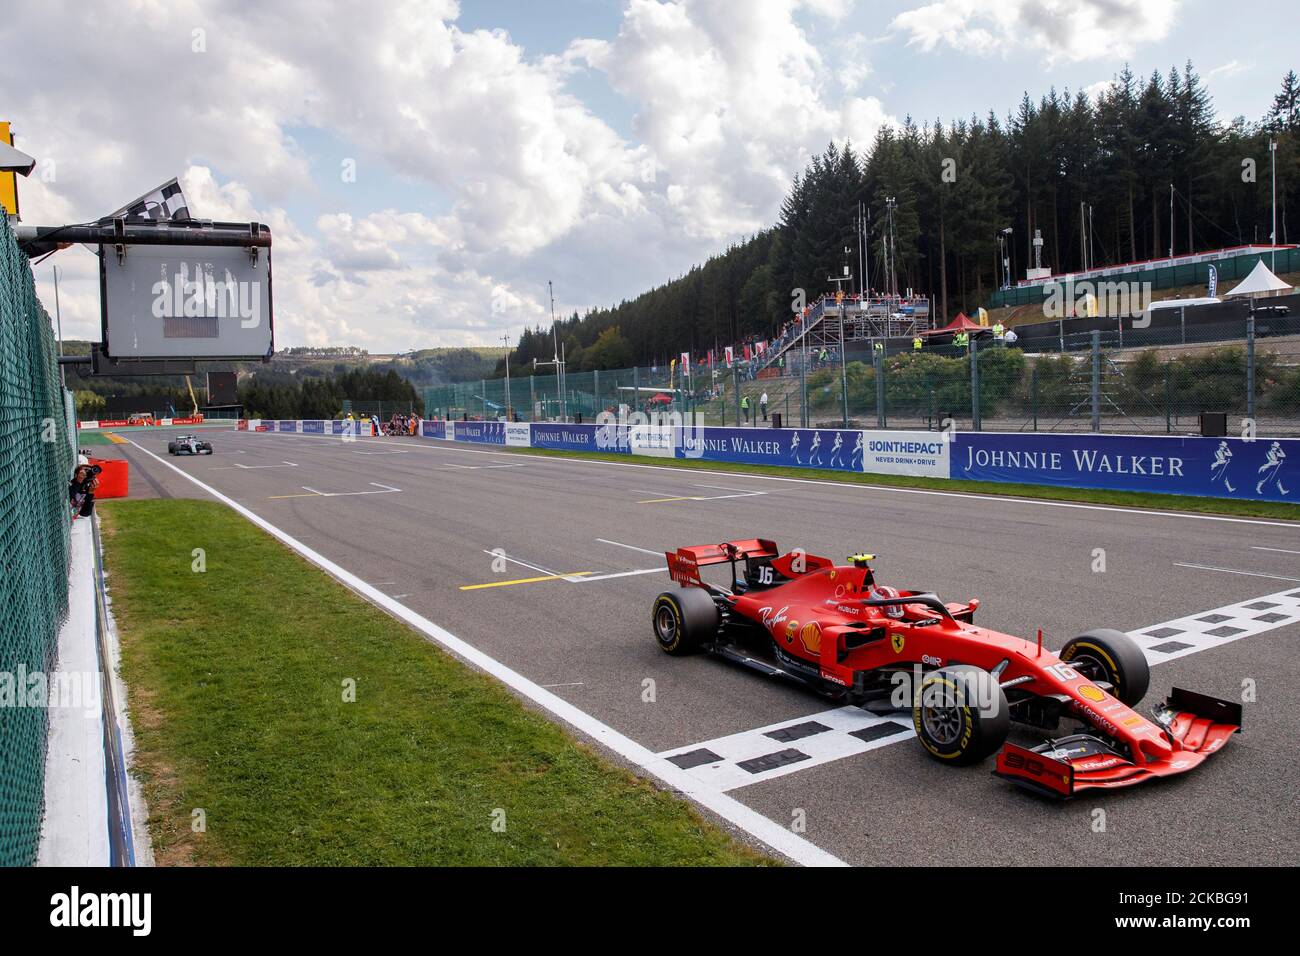 Formula One F1 - Belgian Grand Prix - Spa-Francorchamps, Stavelot, Belgium  - September 1, 2019 Ferrari's Charles Leclerc crosses the finish line to  win the race with Mercedes' Lewis Hamilton finishing second